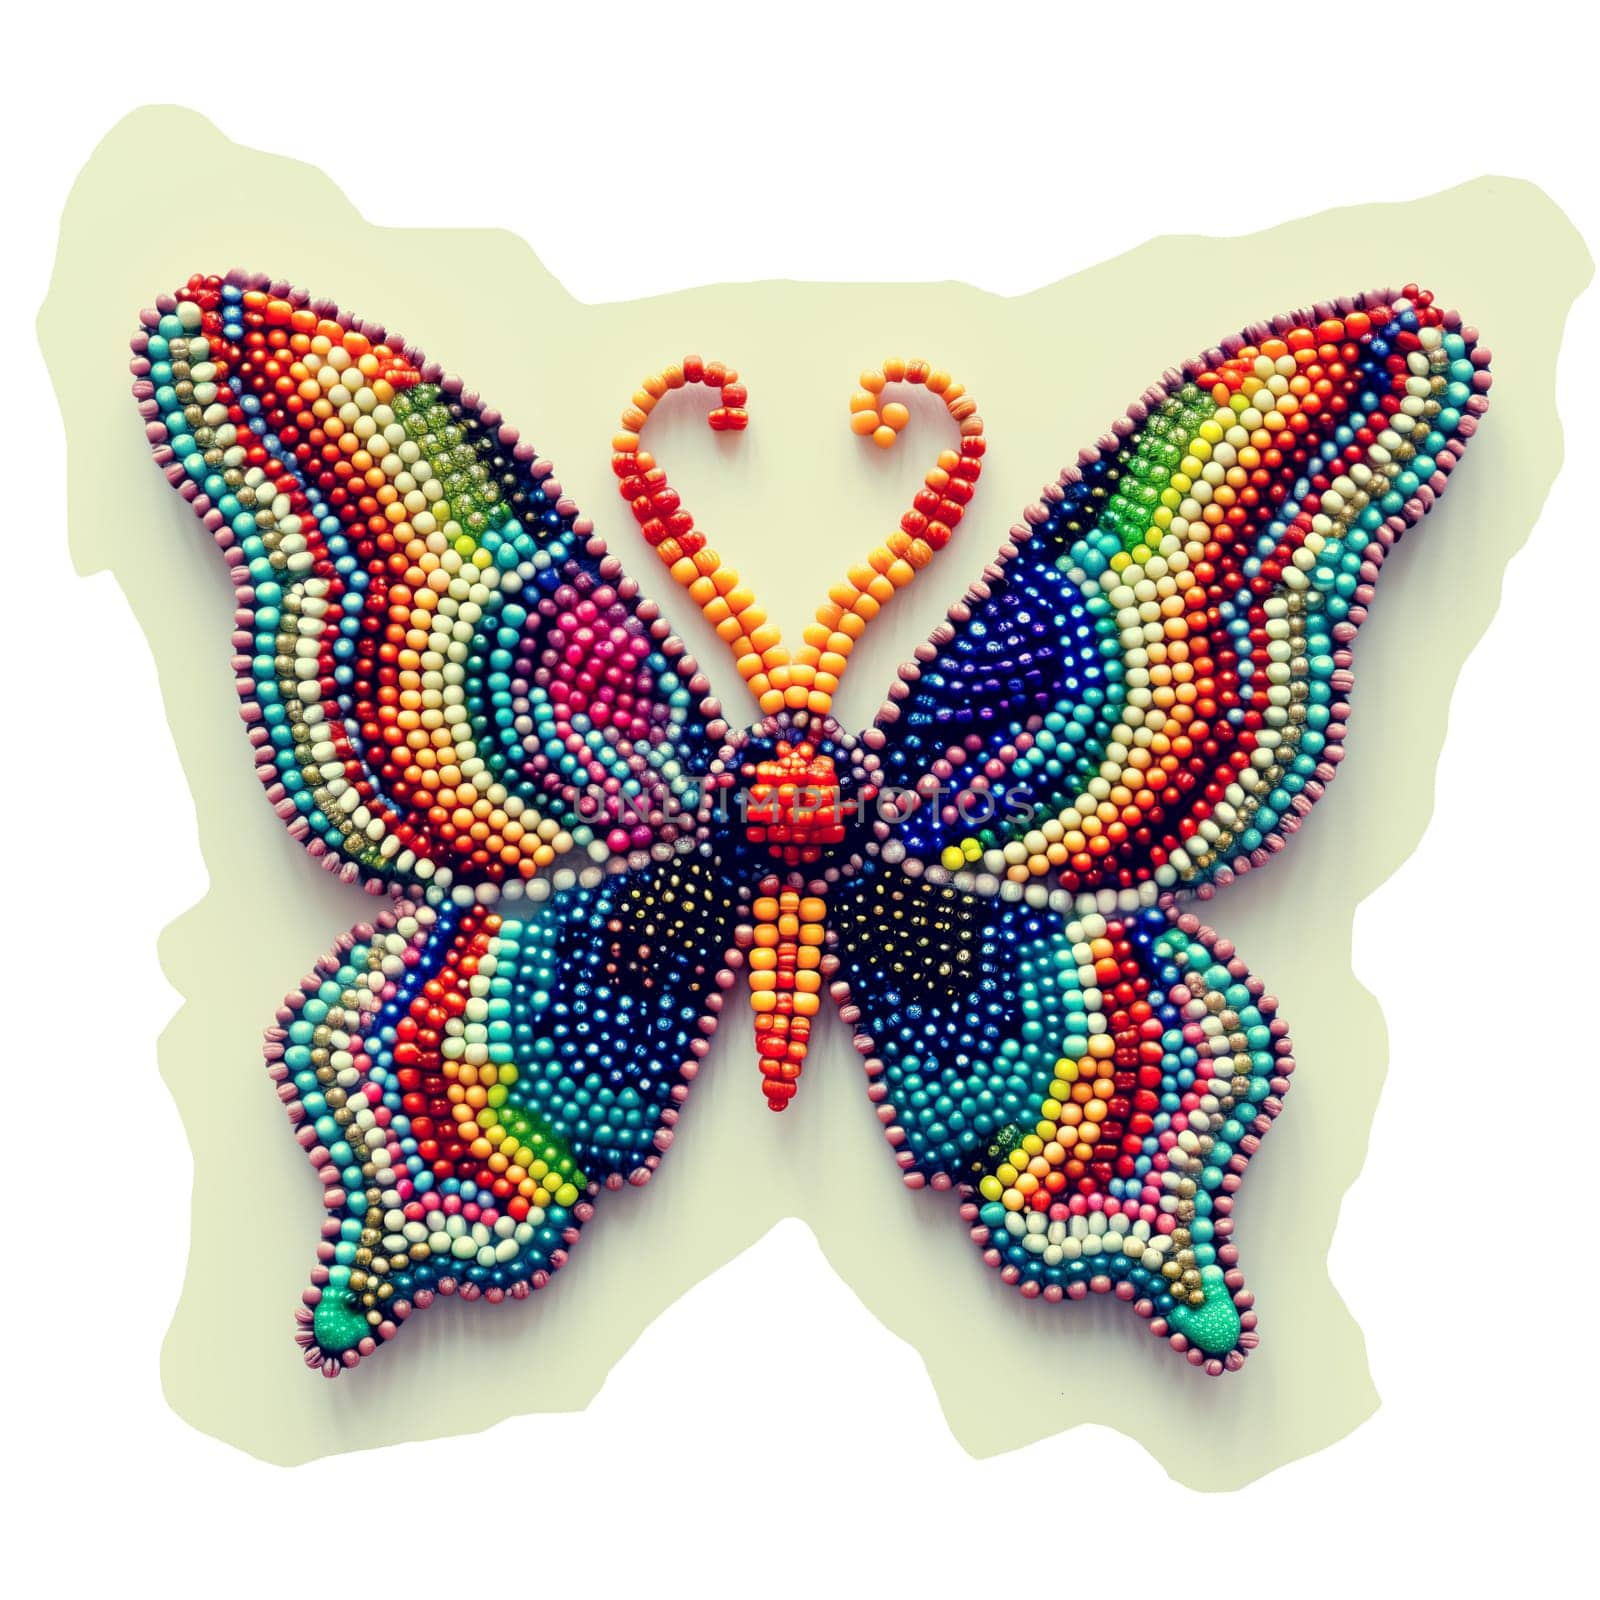 Decorative butterfly made of colored beads by Dustick